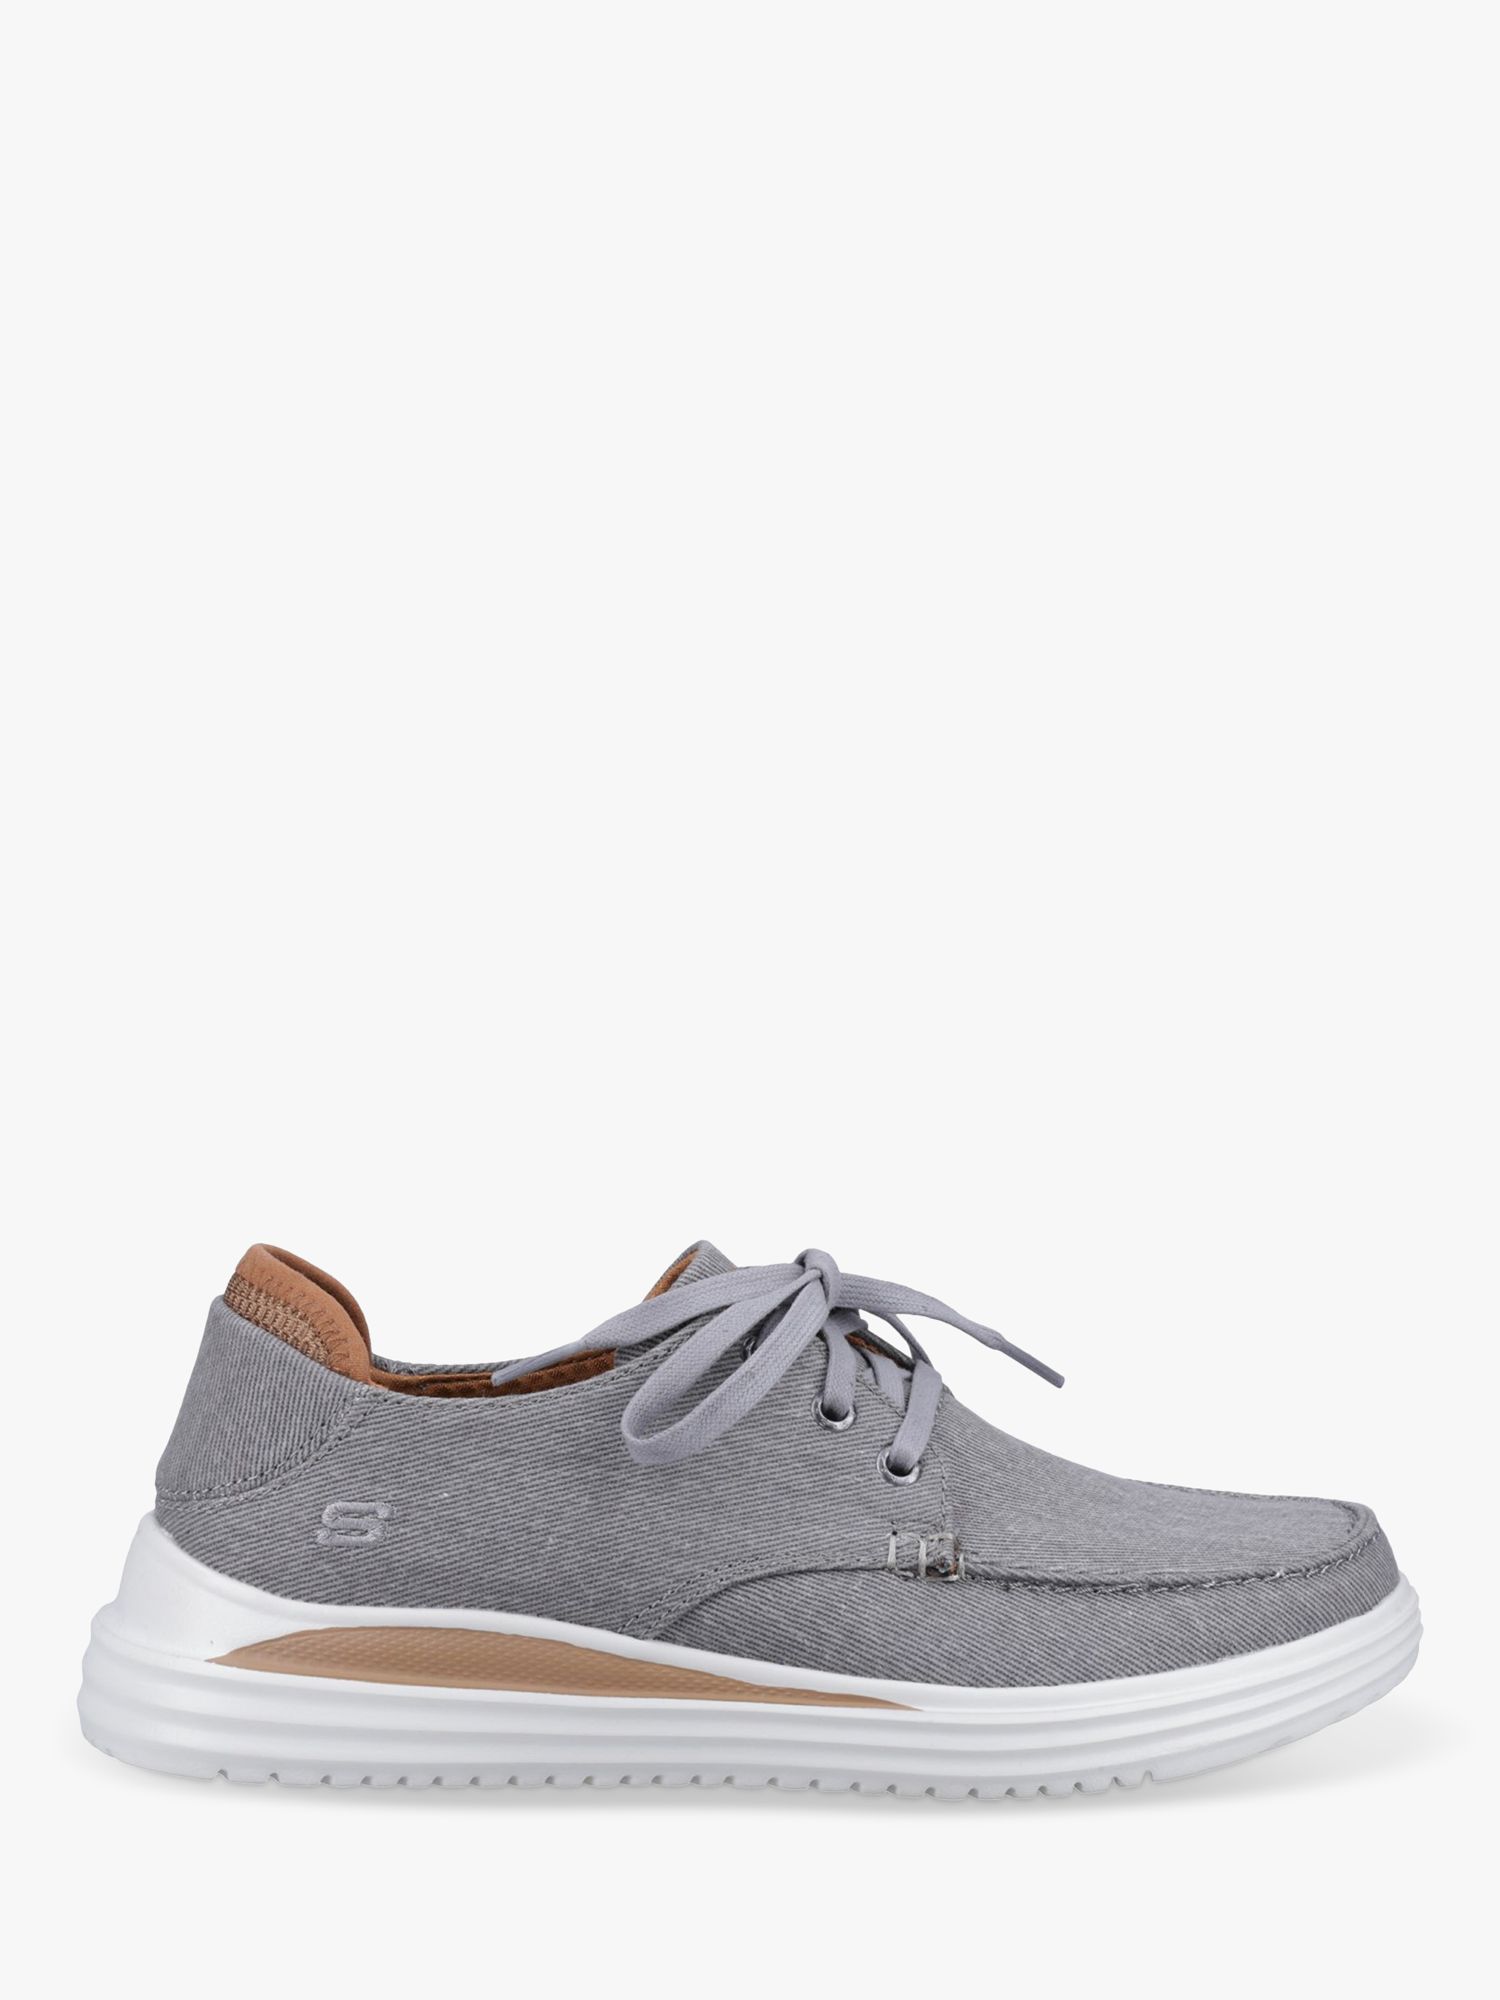 Skechers Proven Forenzo Canvas Shoes, Taupe at Lewis Partners